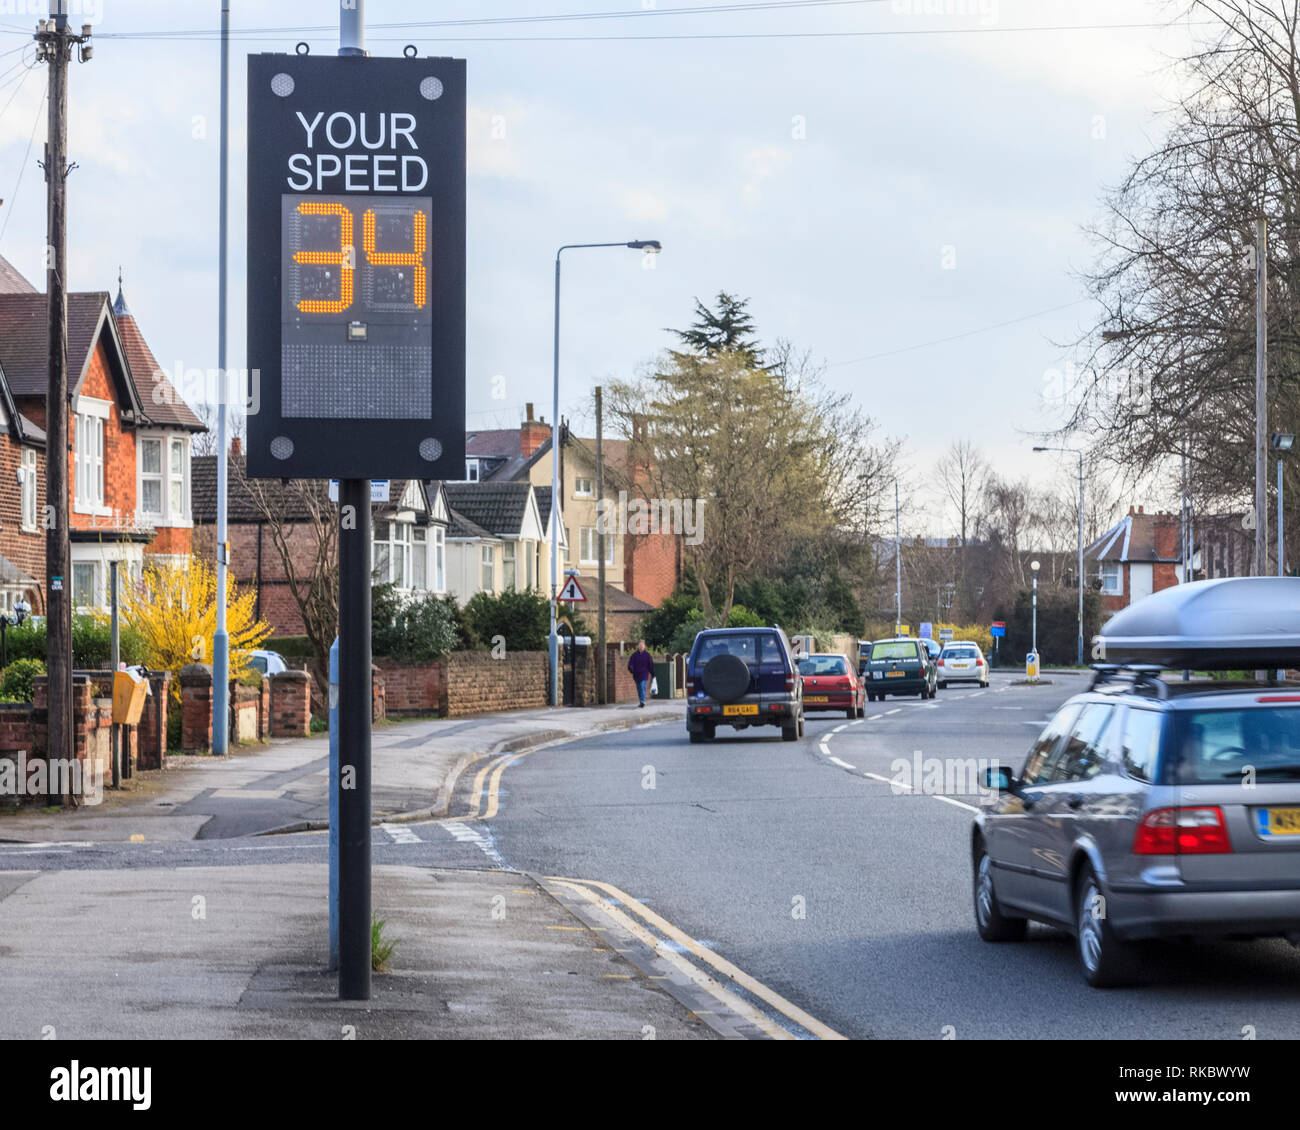 Driving too fast, slow down. A car exceeding the speed limit as it passes a traffic speed warning indicator in Nottinghamshire, England, UK Stock Photo